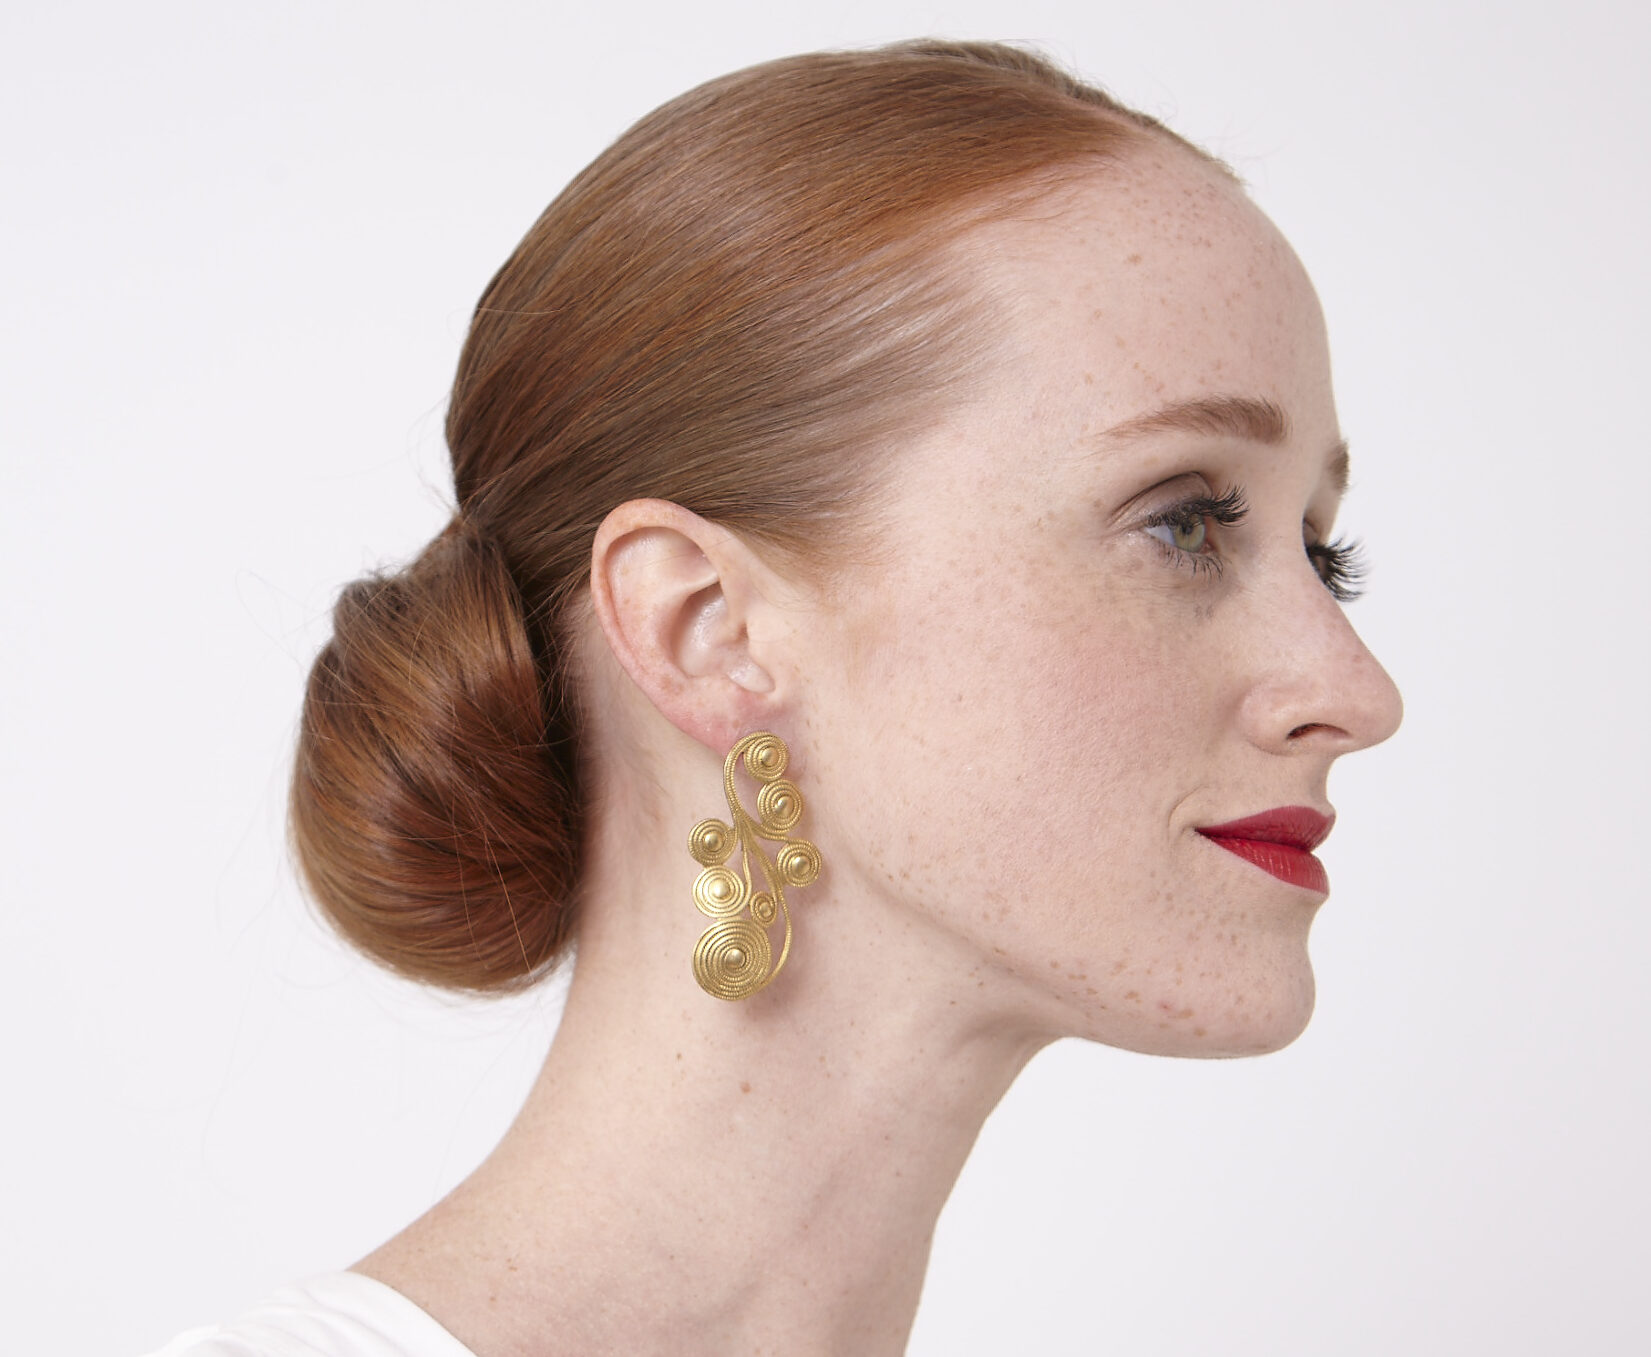 How To Choose Jewelry To Complement Your Skin Tone and Red Hair